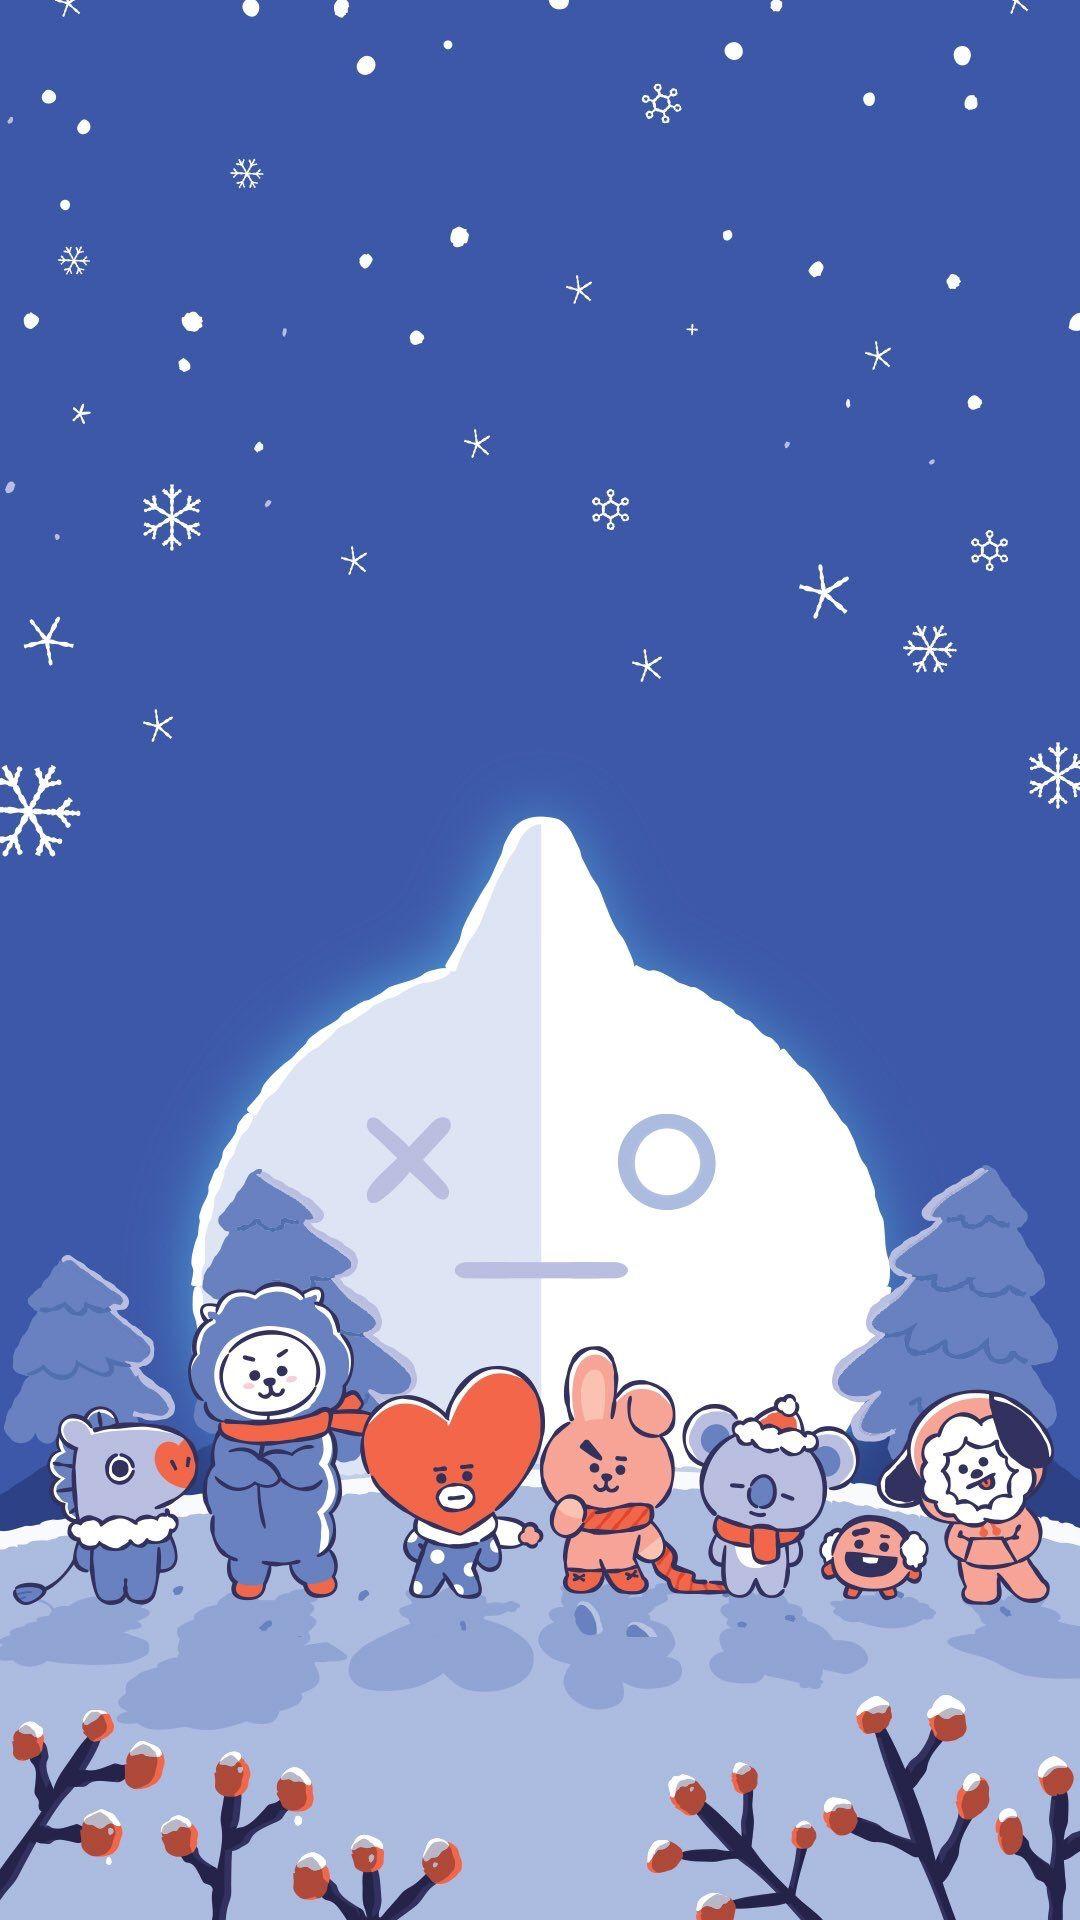 Hot or cold, it doesn't matter wherever you are! BT21 will make your days special